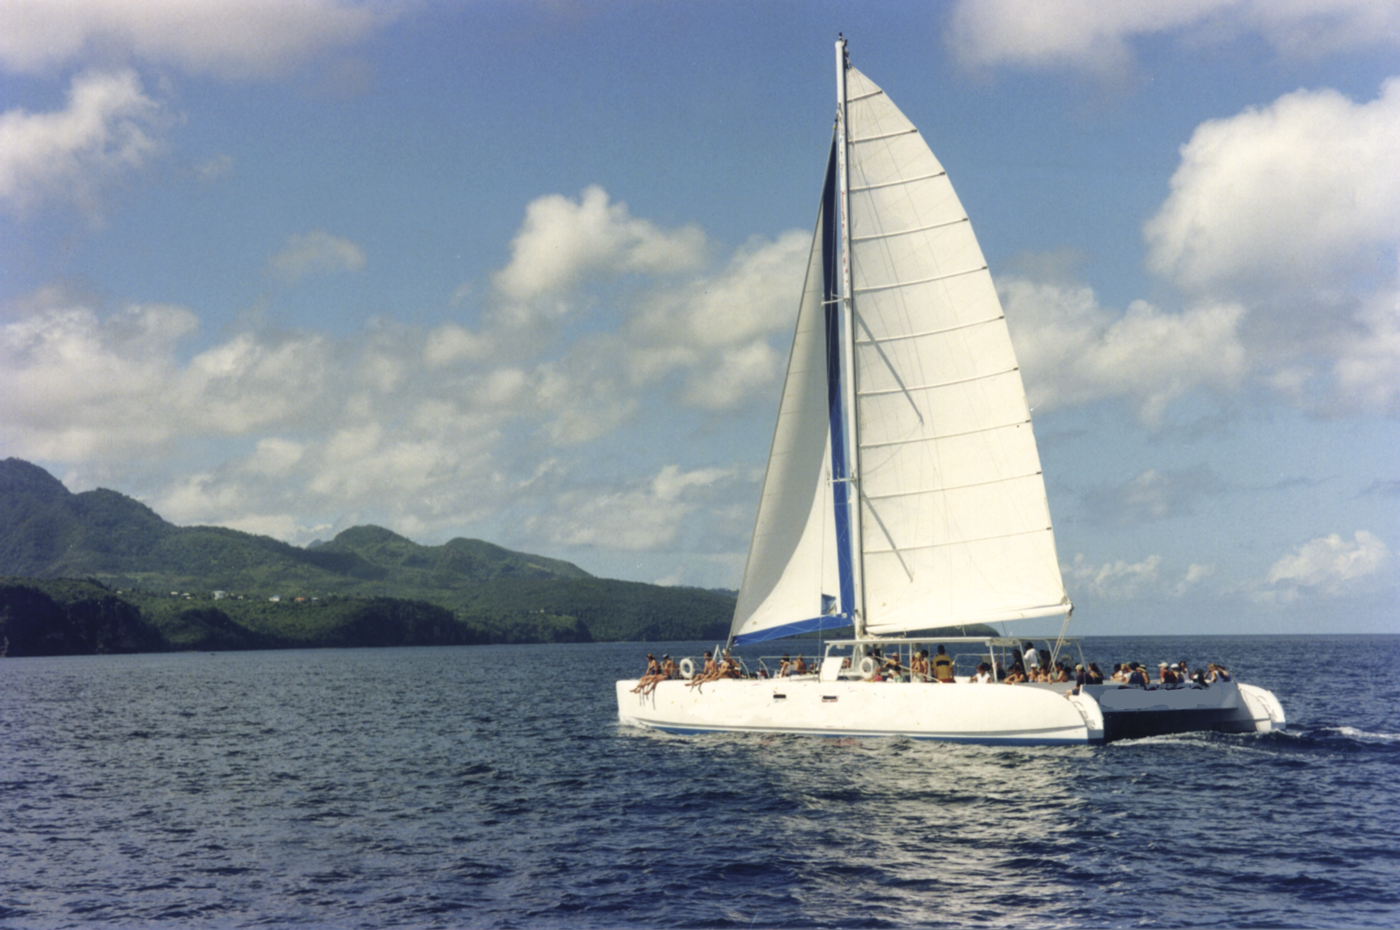 Boat from Rodney Bay in Saint Lucia